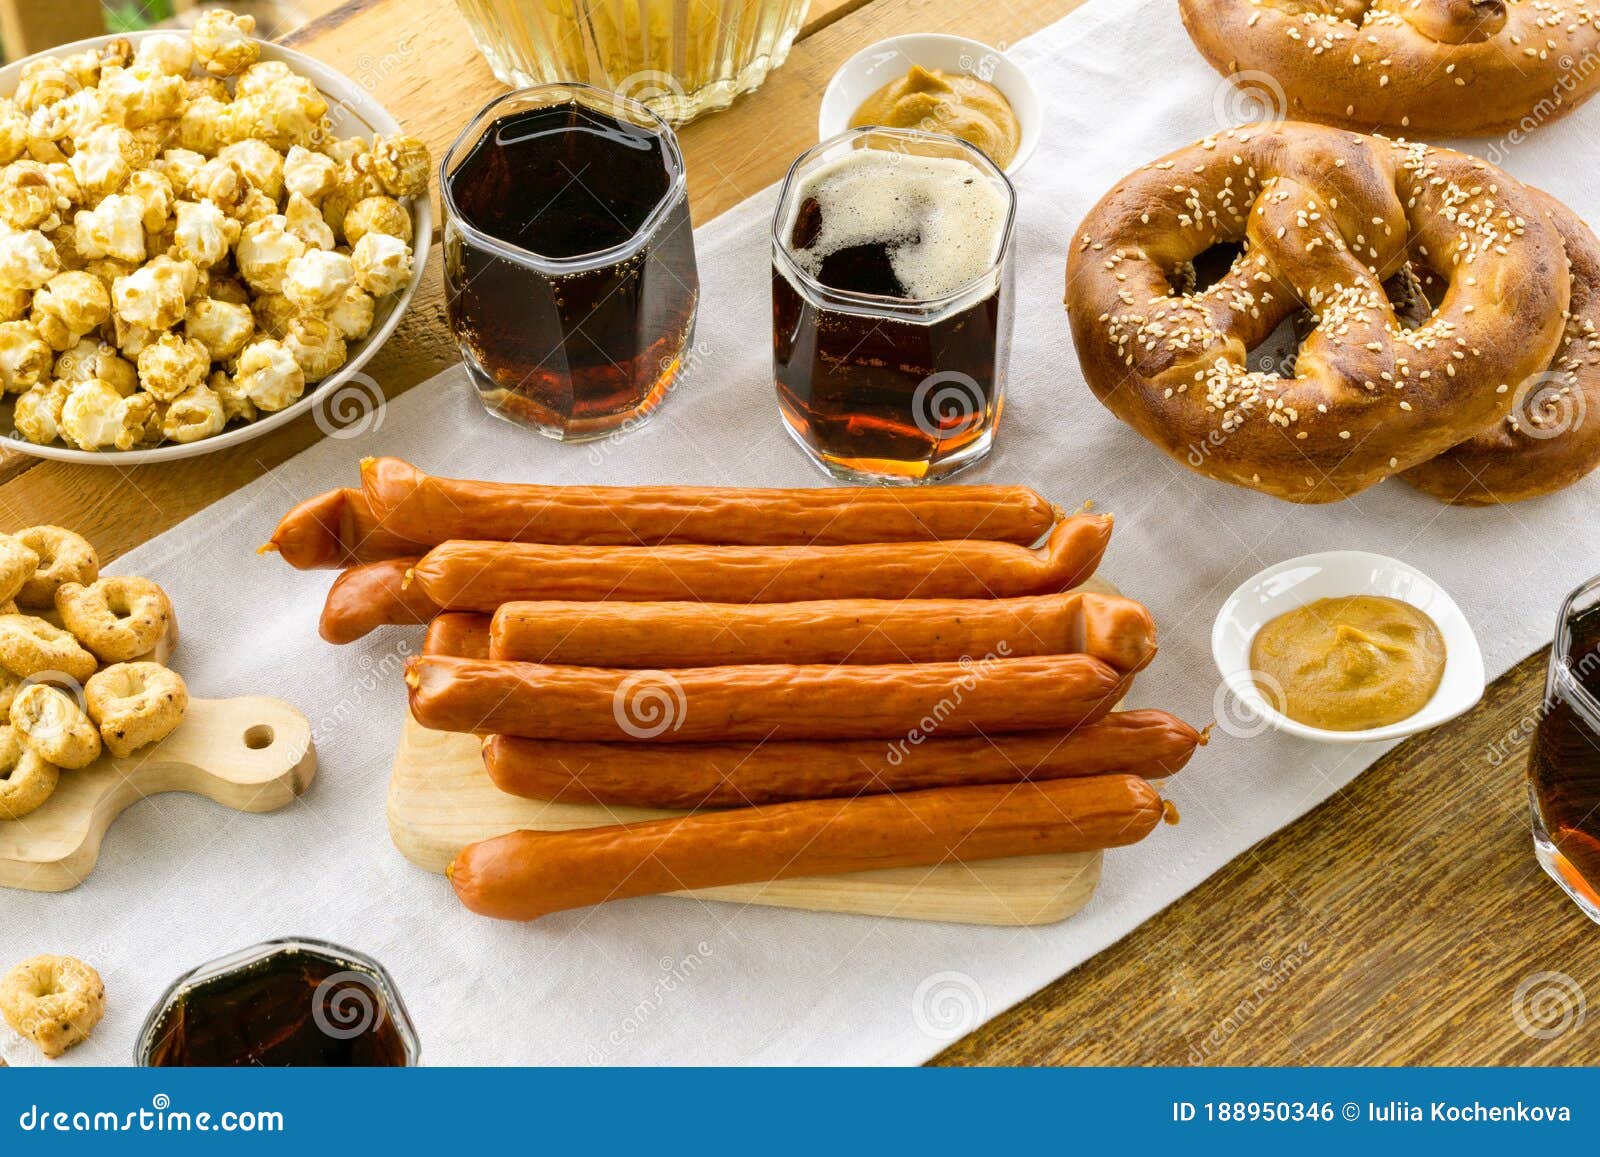 Oktober Fest Food on a Wooden Stock Photo Image of delicacy, munich: